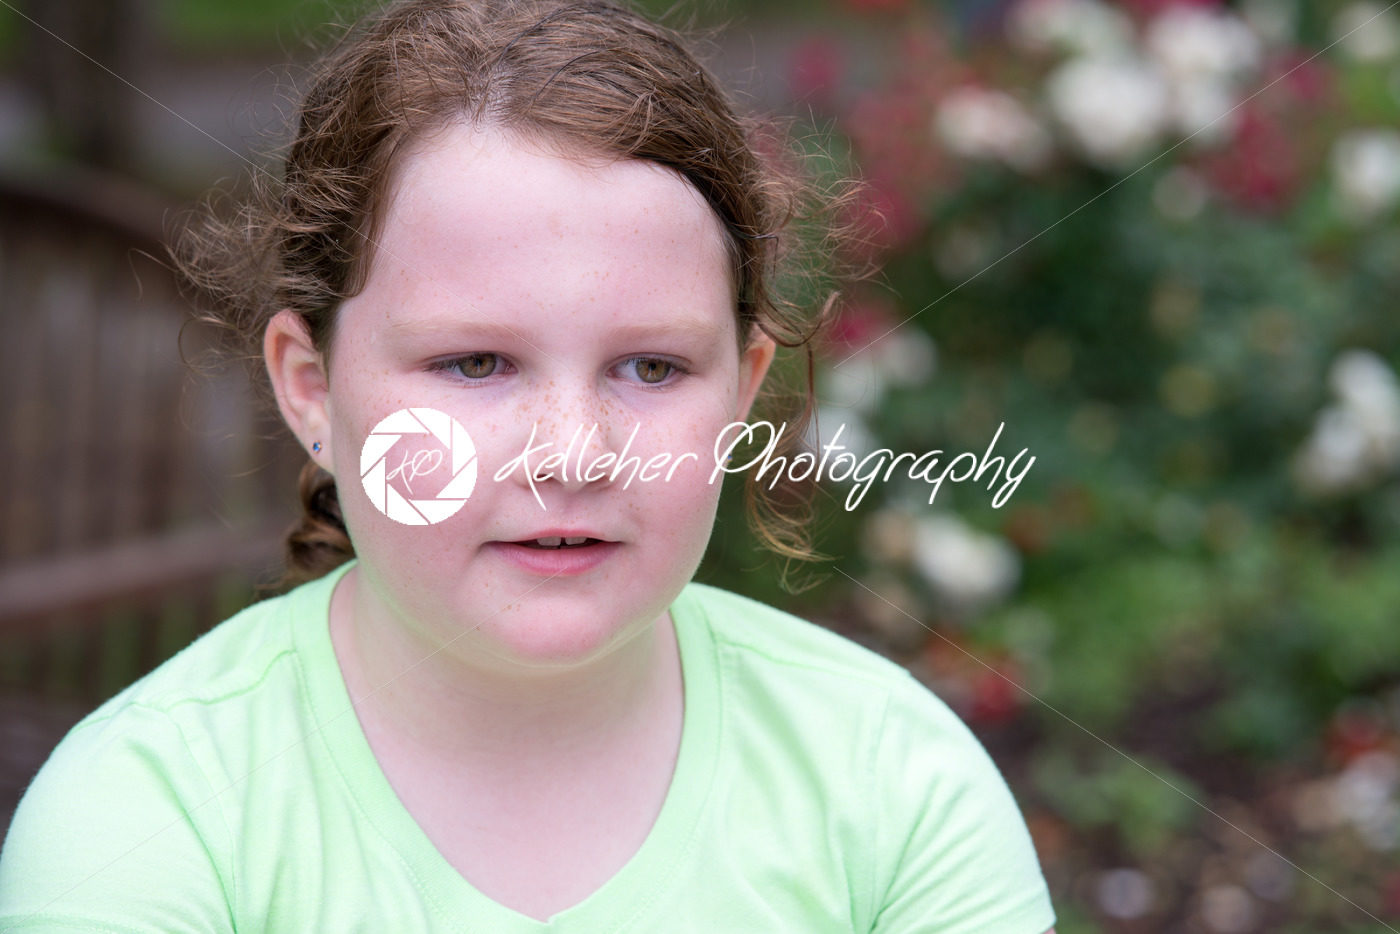 Close-up portrait of a cute redhead girl thinking - Kelleher Photography Store